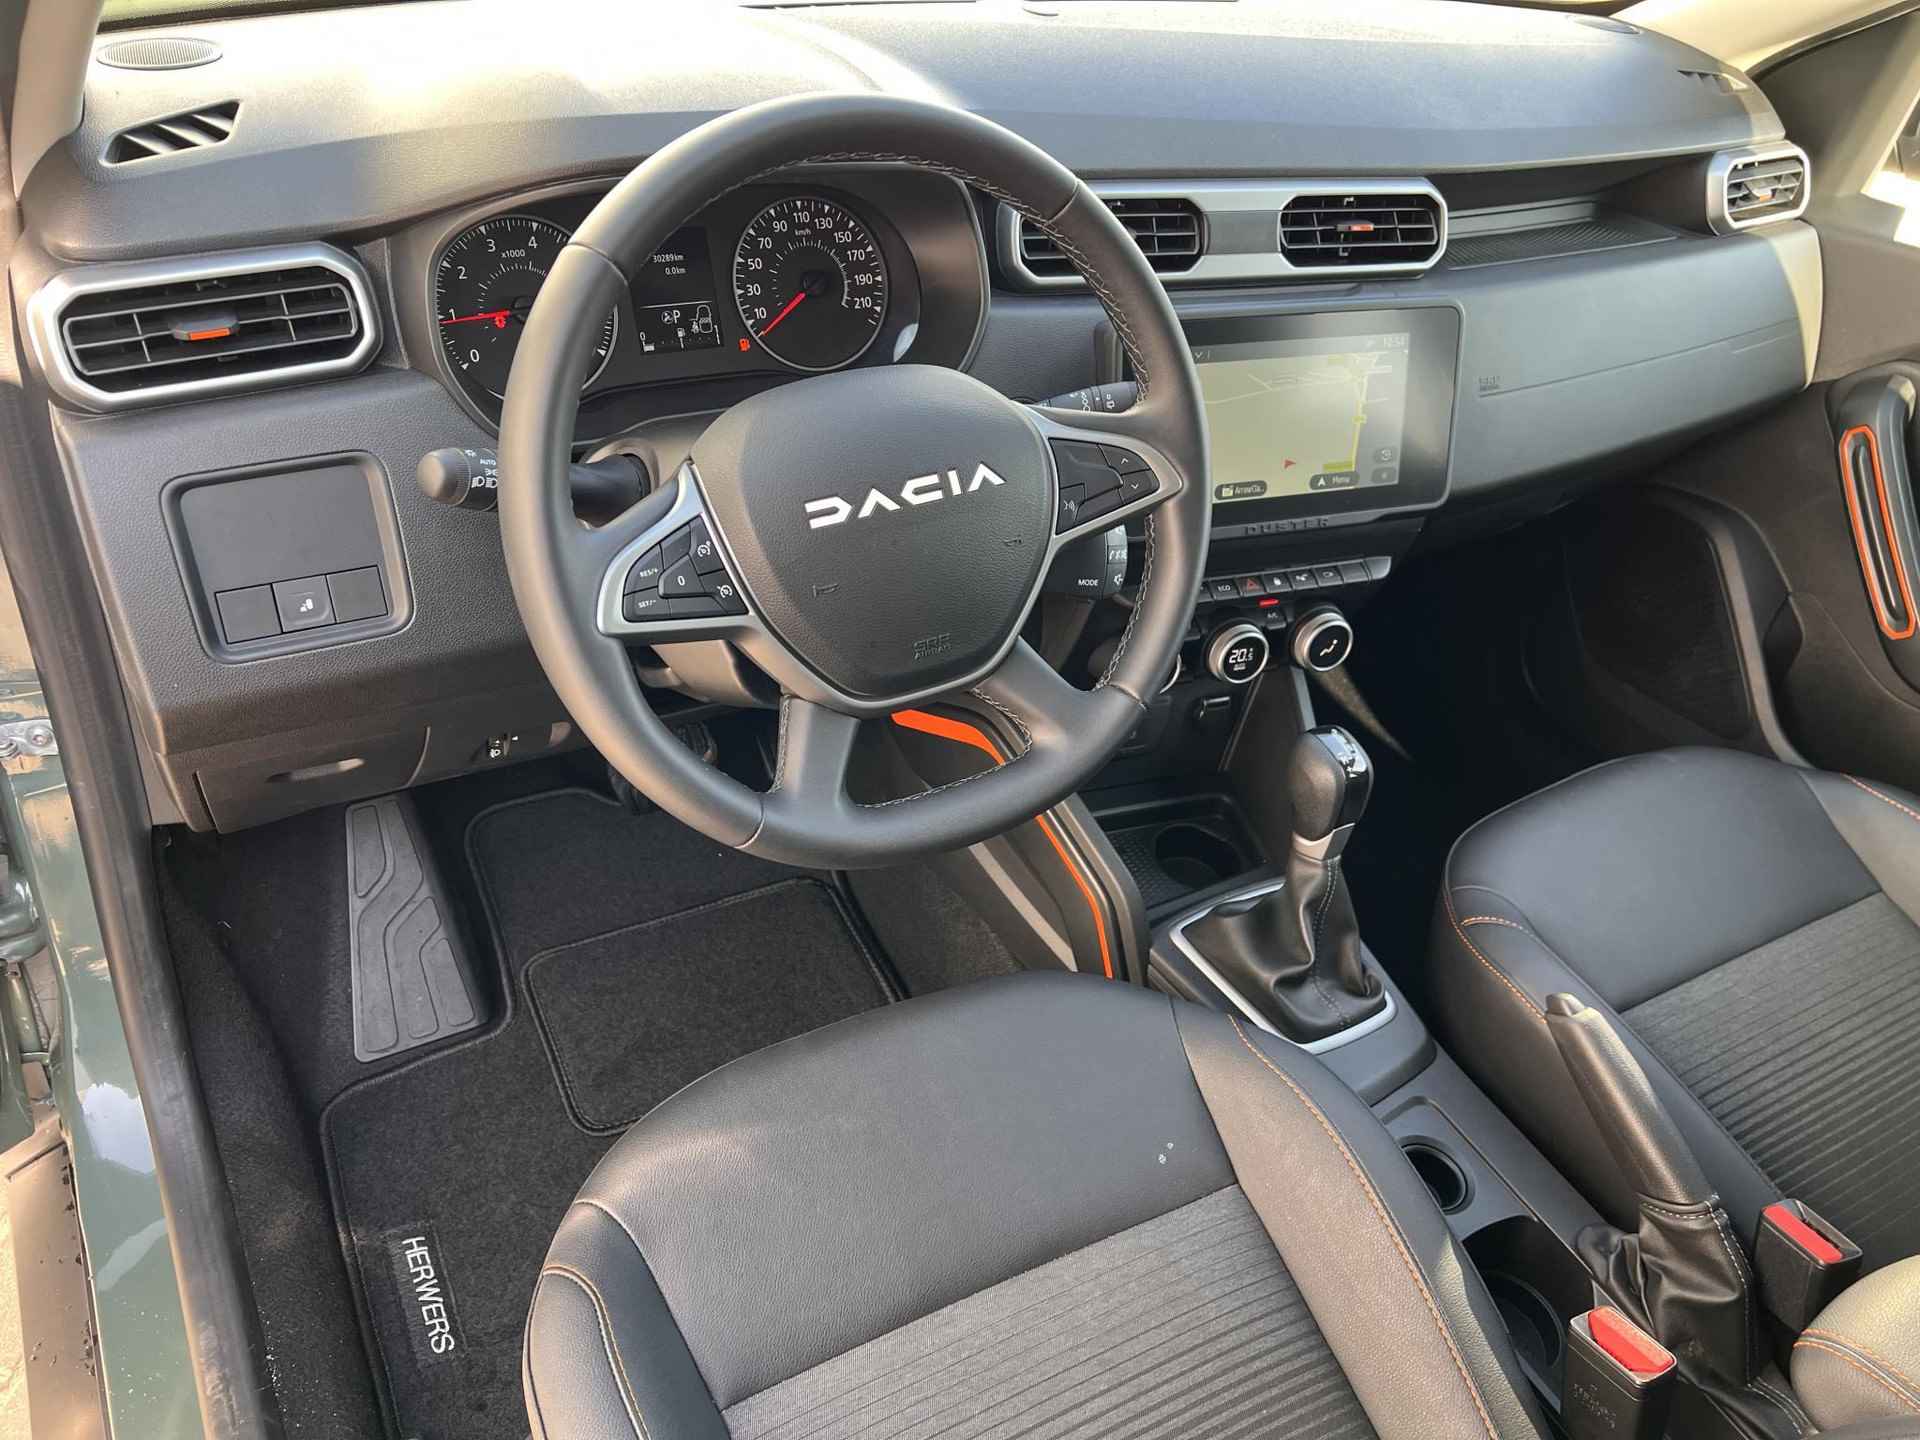 Dacia Duster 1.3 TCe 150 Extreme Automaat / Navigatie / Camera 360° / Apple Carplay Android / All Season banden / - 24/49